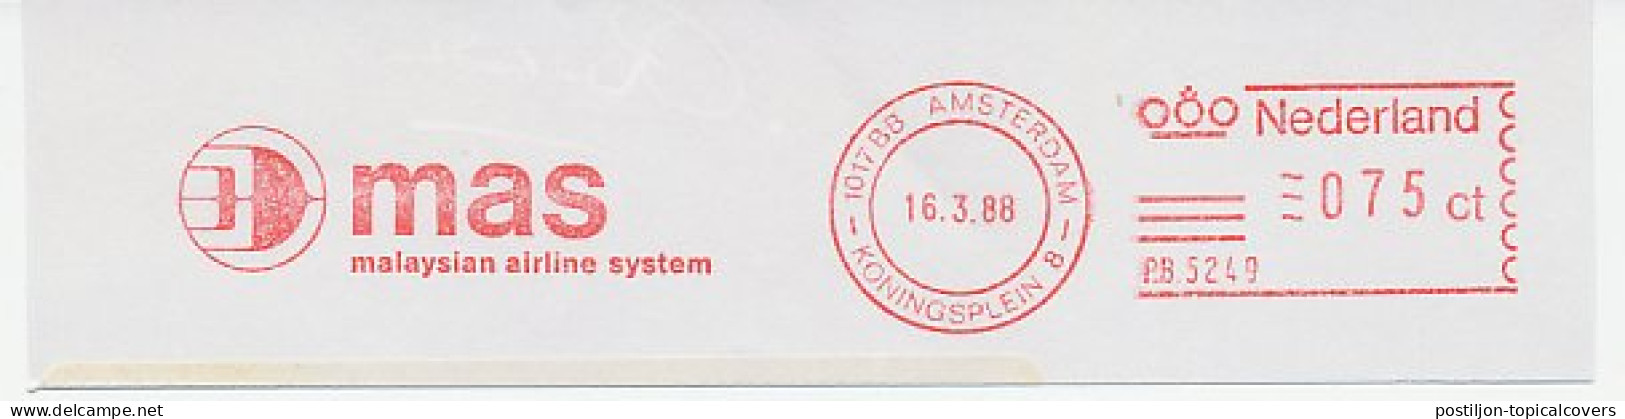 Meter Cut Netherlands 1988 MAS - Malaysian Airline System - Airplanes